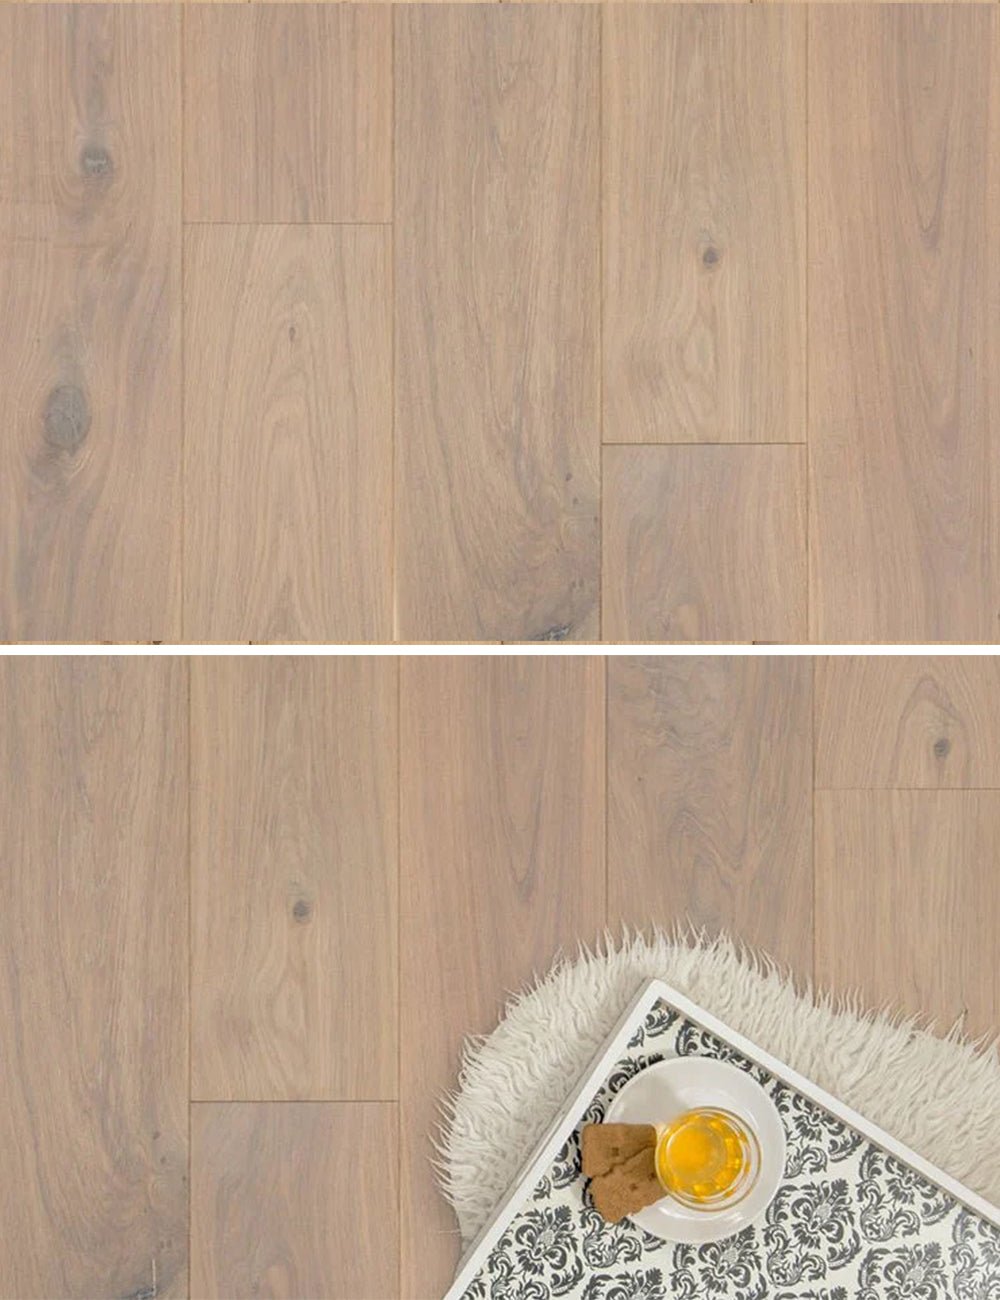 Floer Lamelparket Chêne Rustique Multiplank Single Smoked &amp; White Oiled - Parquet - Solza.nl